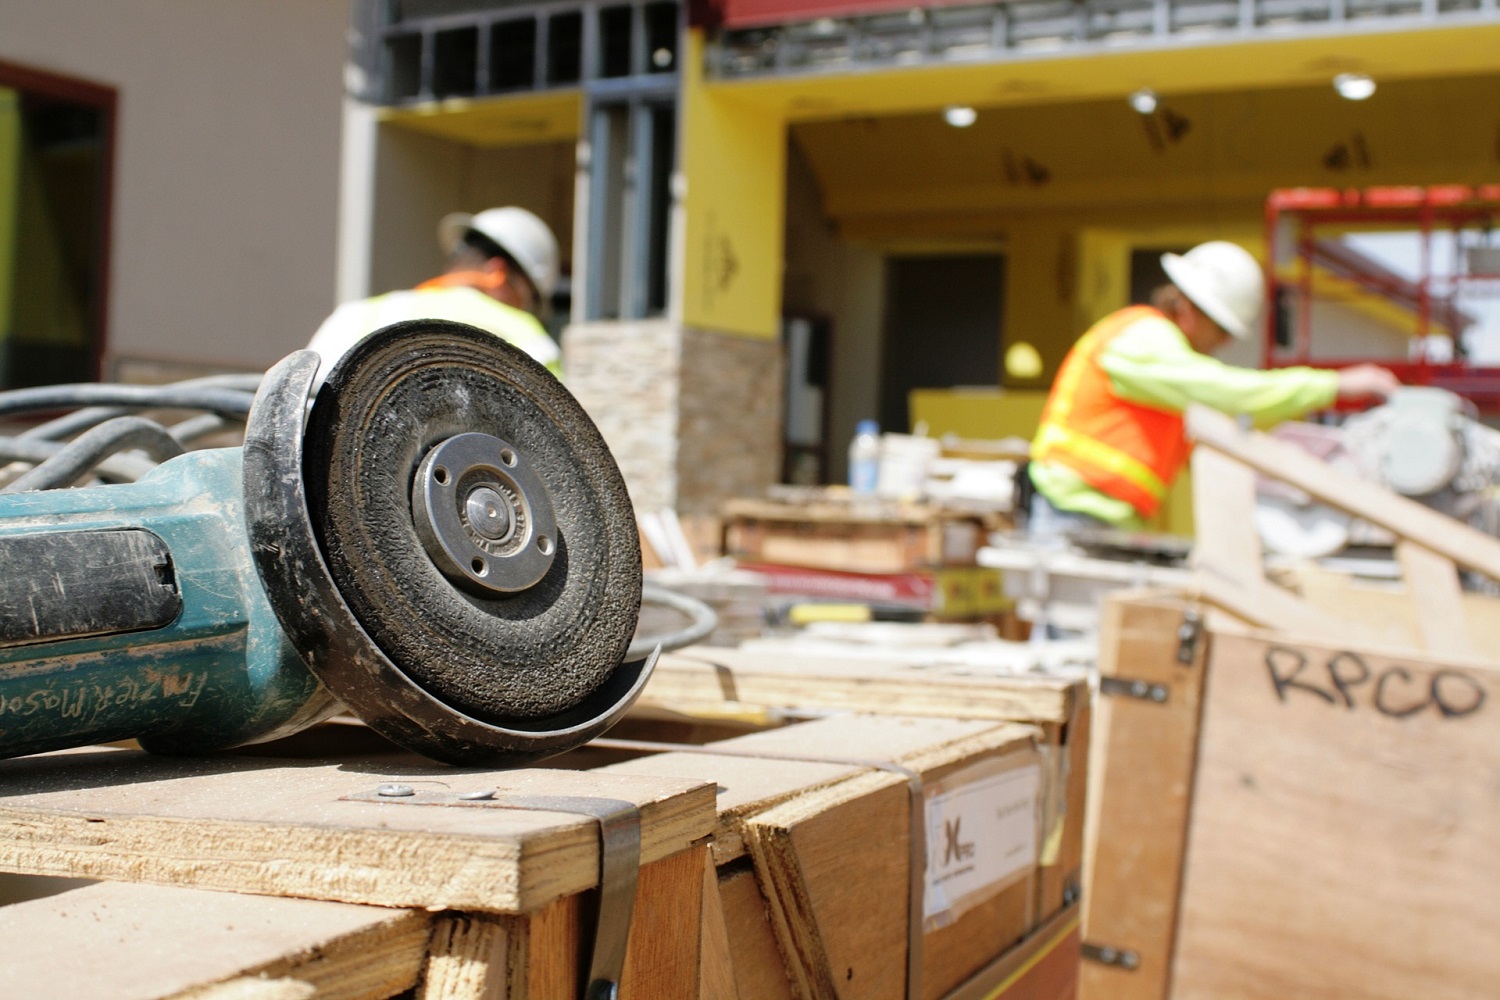 Construction health and safety – Keeping people safe during construction work